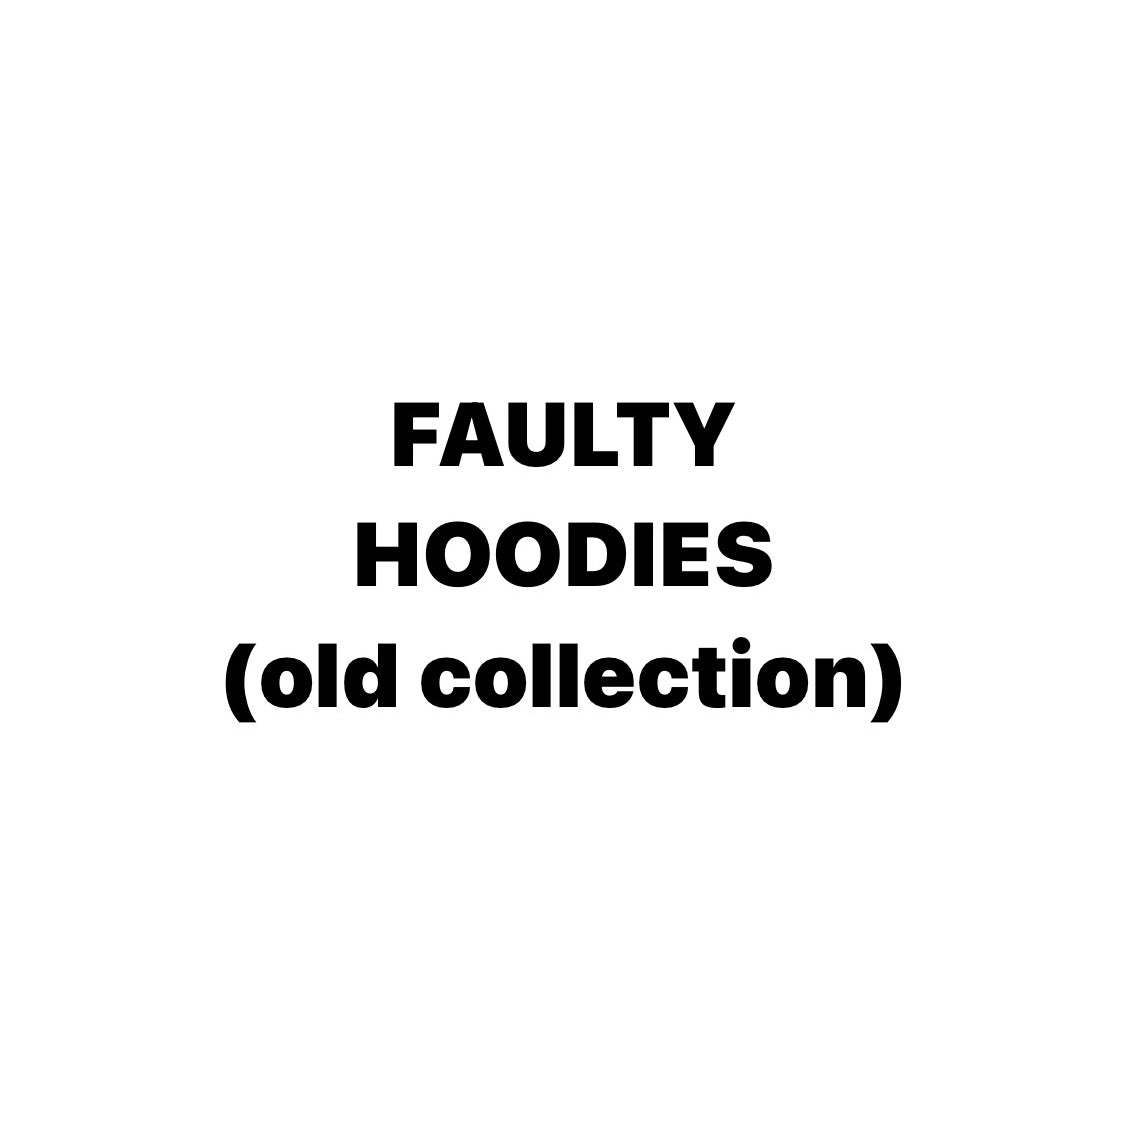 FAULTY - HOODIES (OLD COLLECTION)